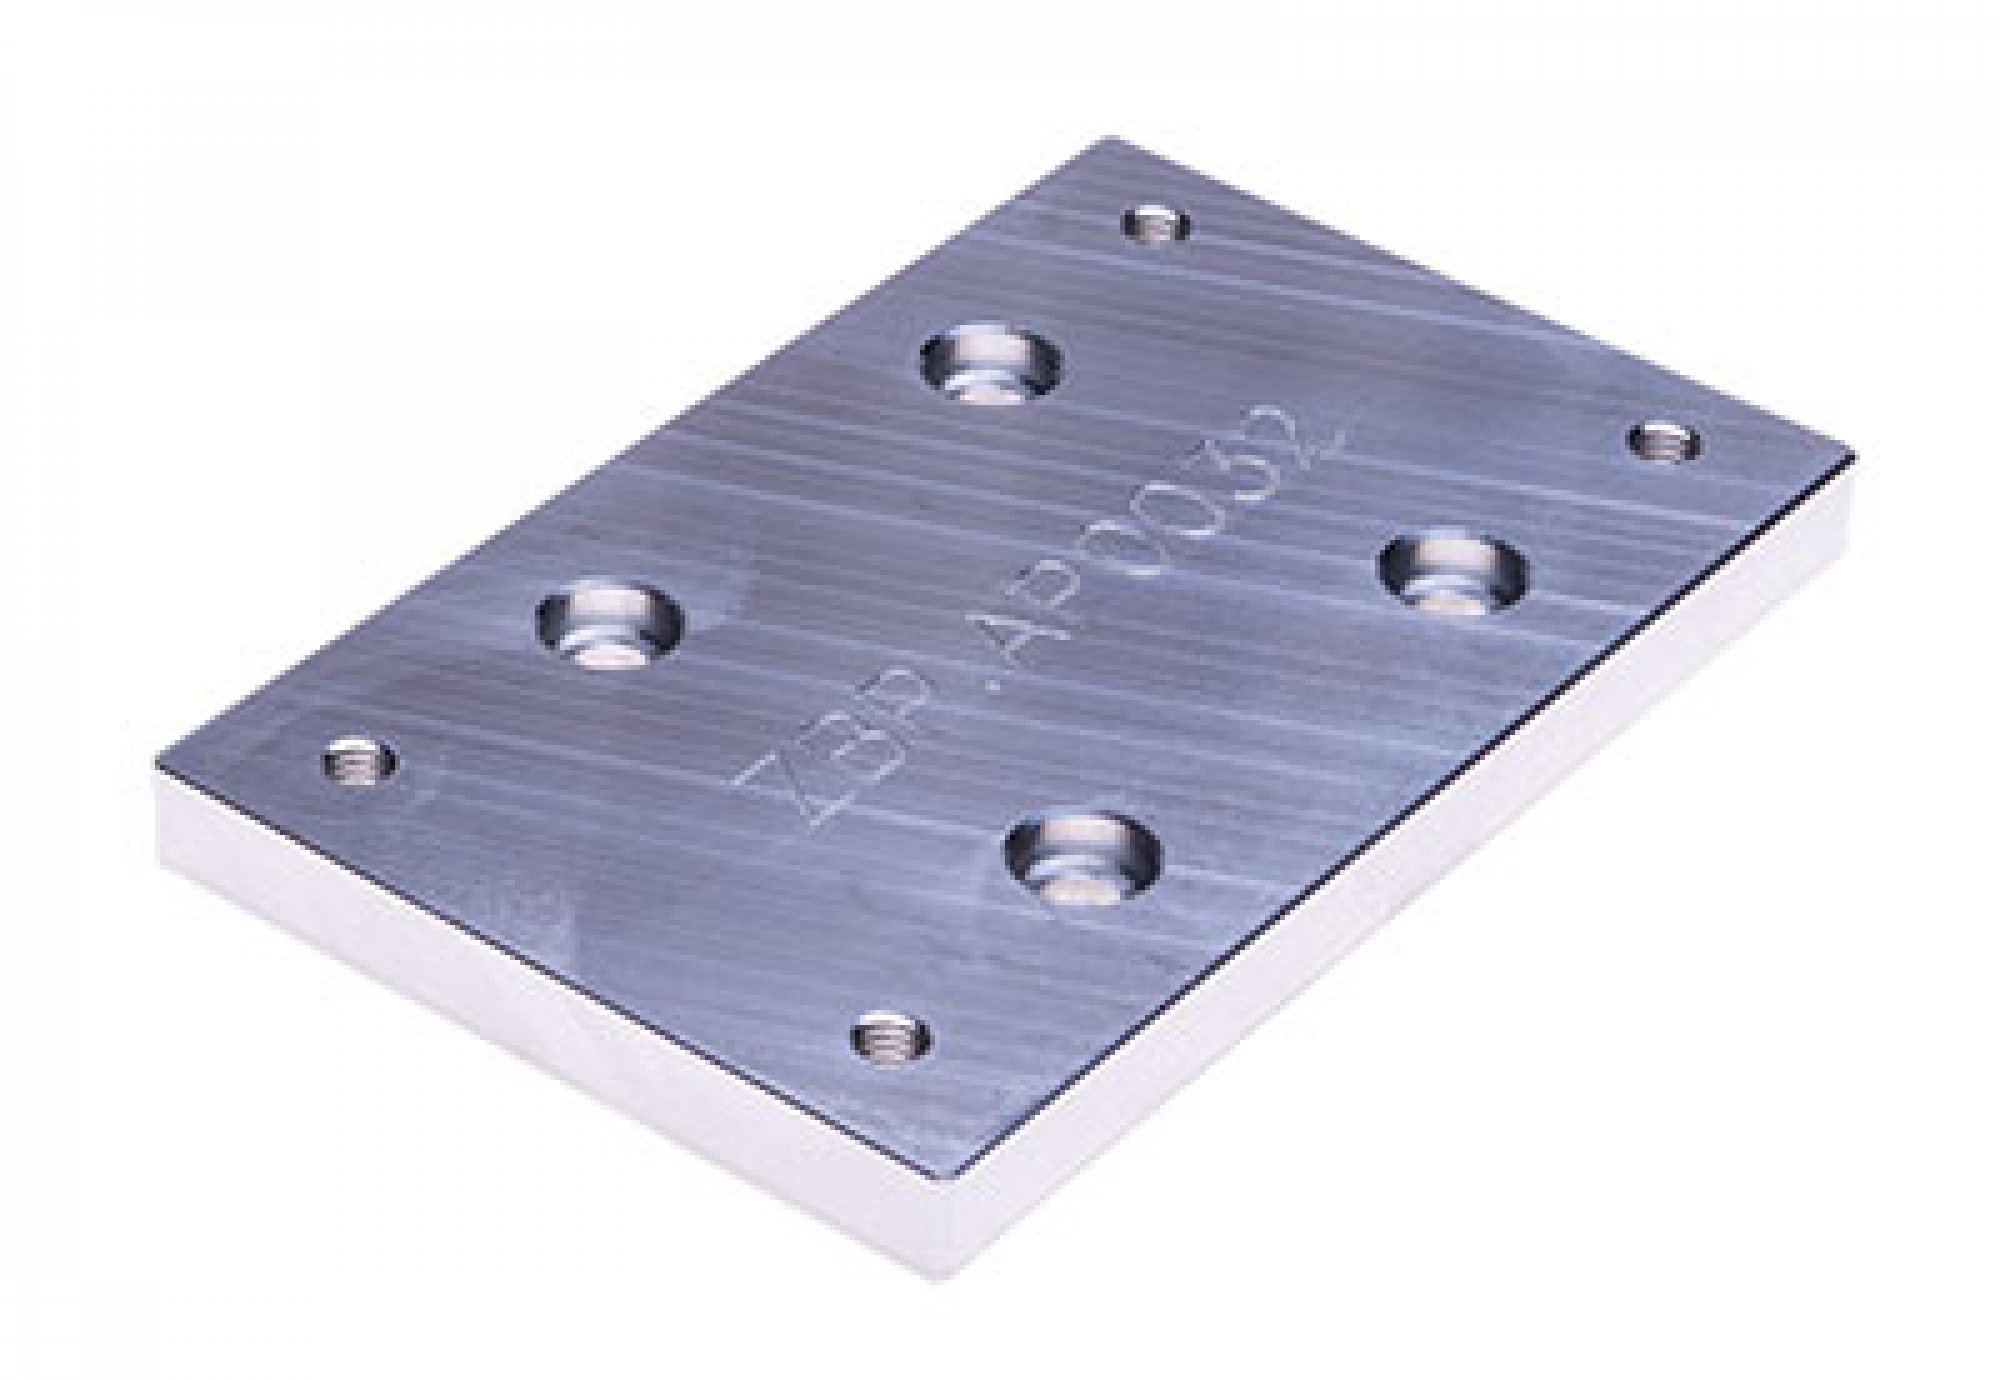 Mounting plate for 65 mm spindle holder